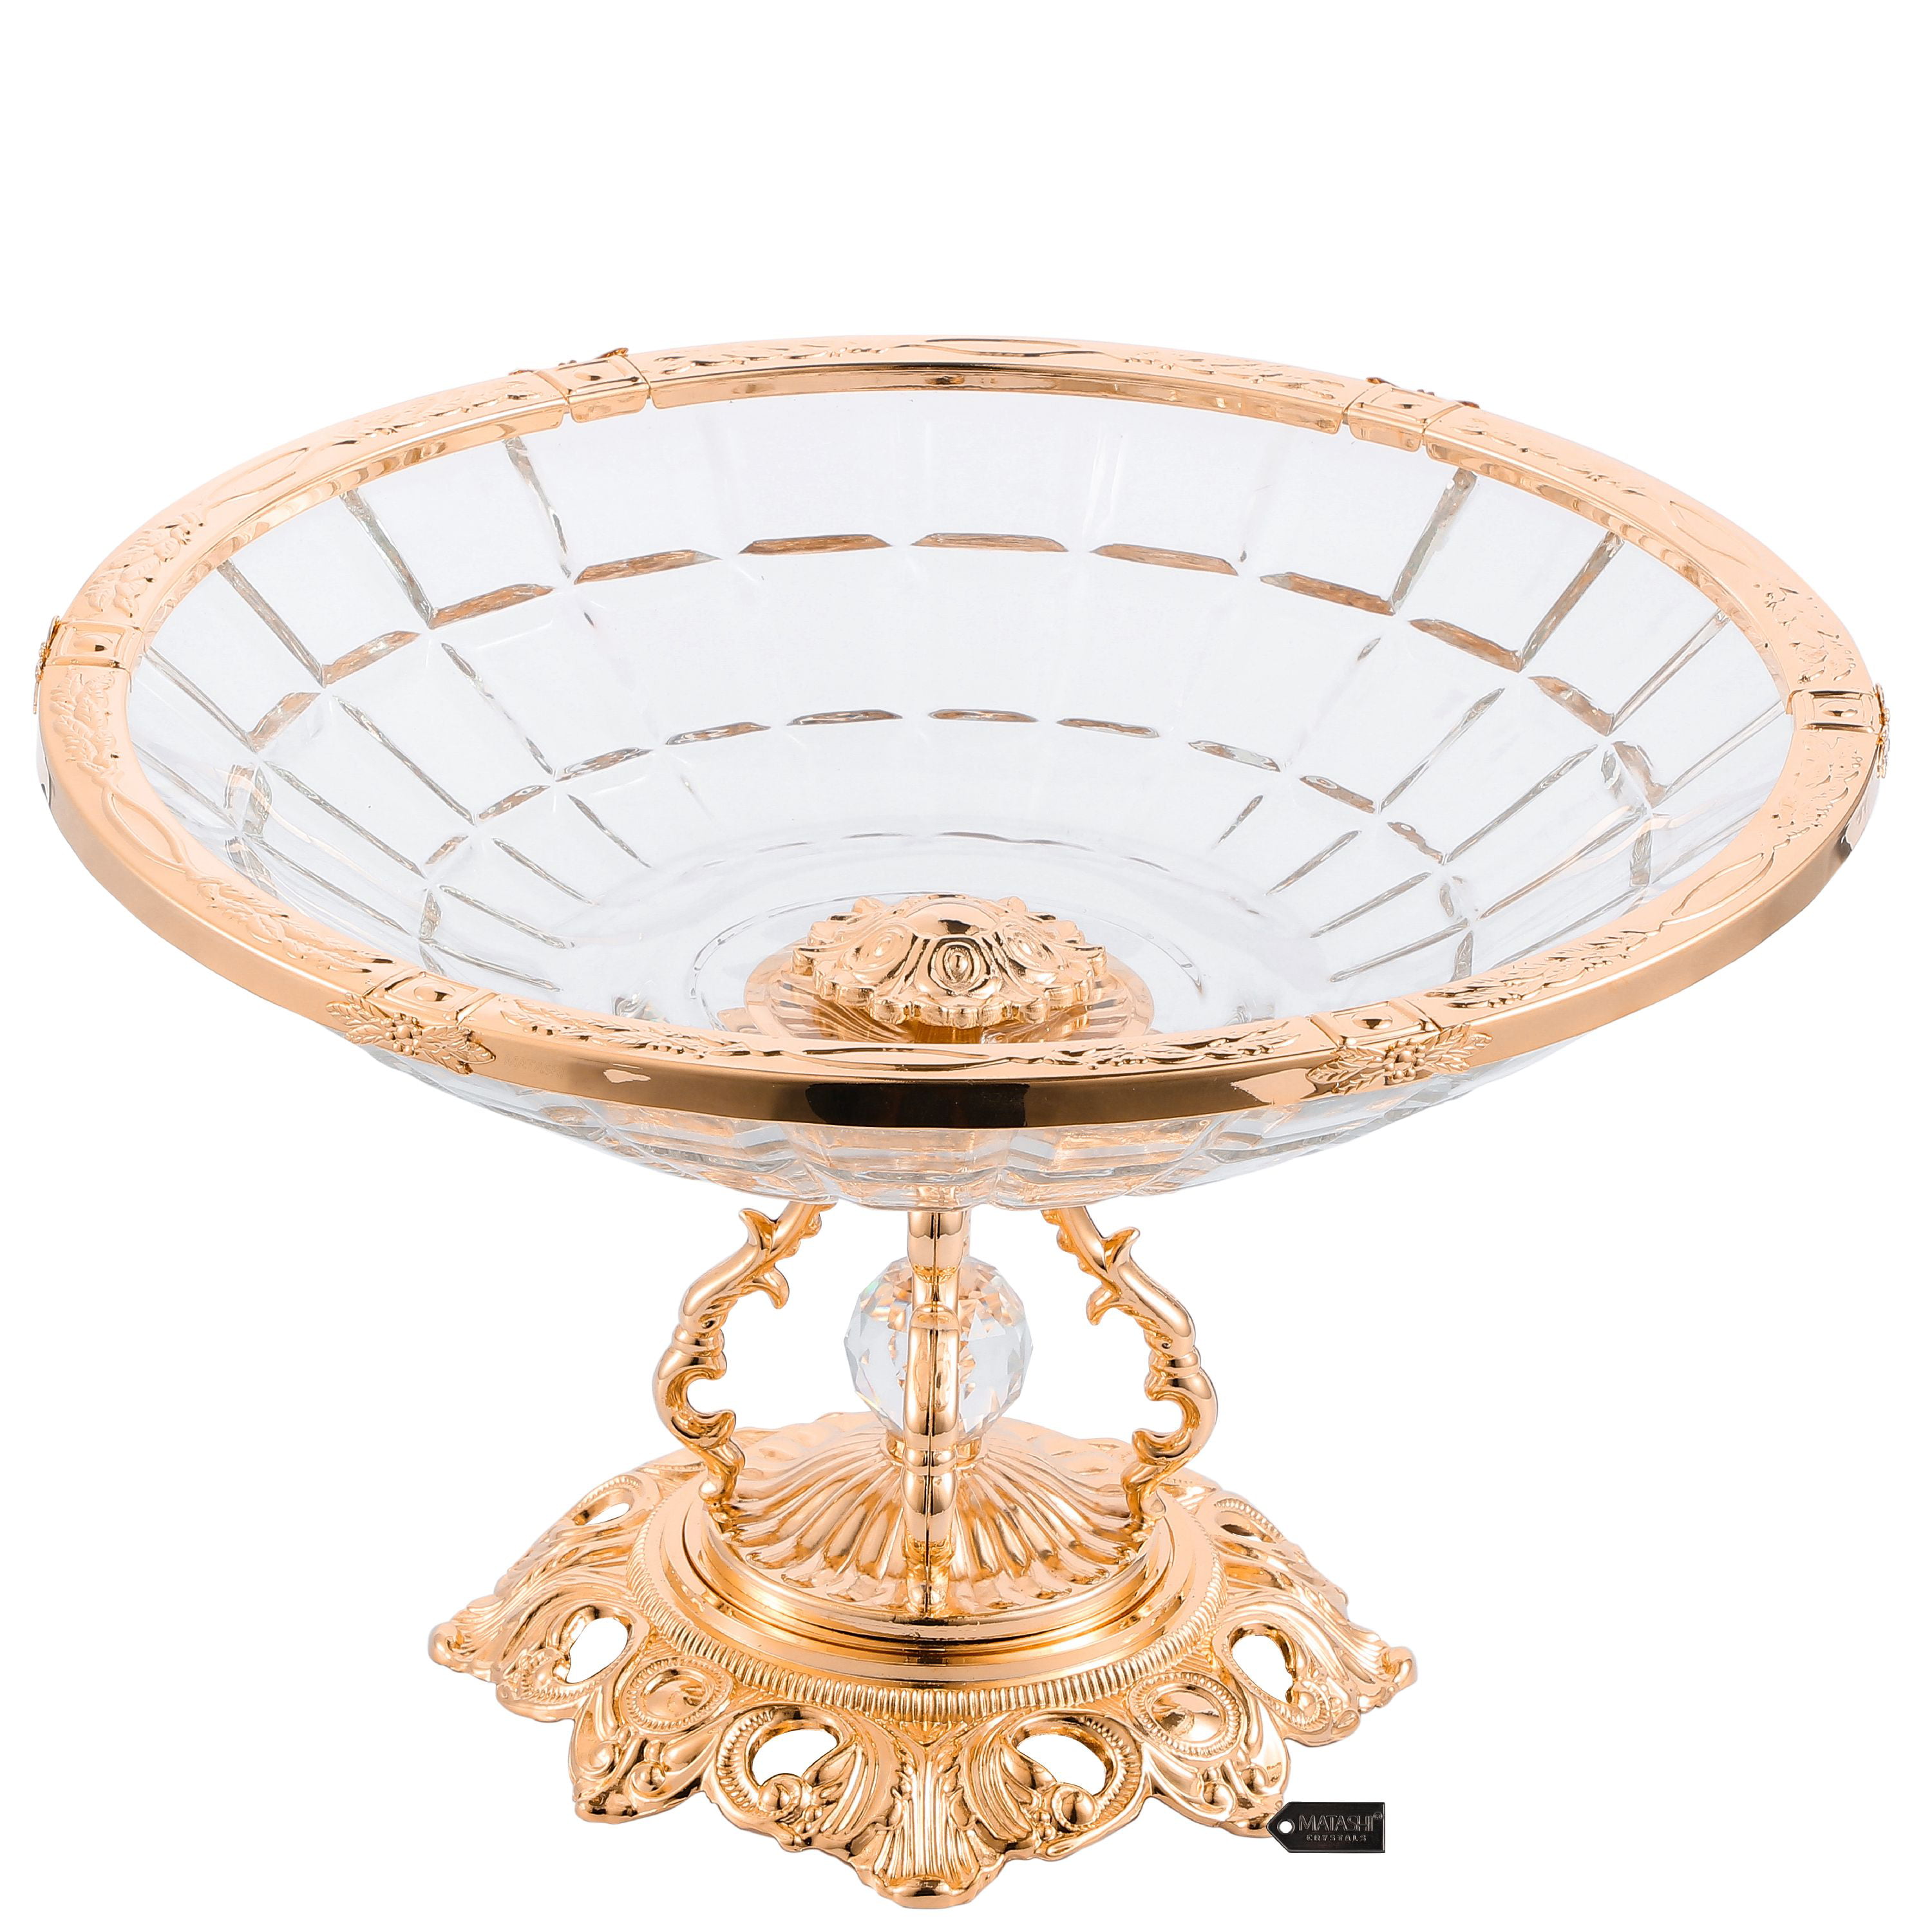 Crystal Candy Centerpiece Decorative Bowl Plate Dish, Round Serving Platter...